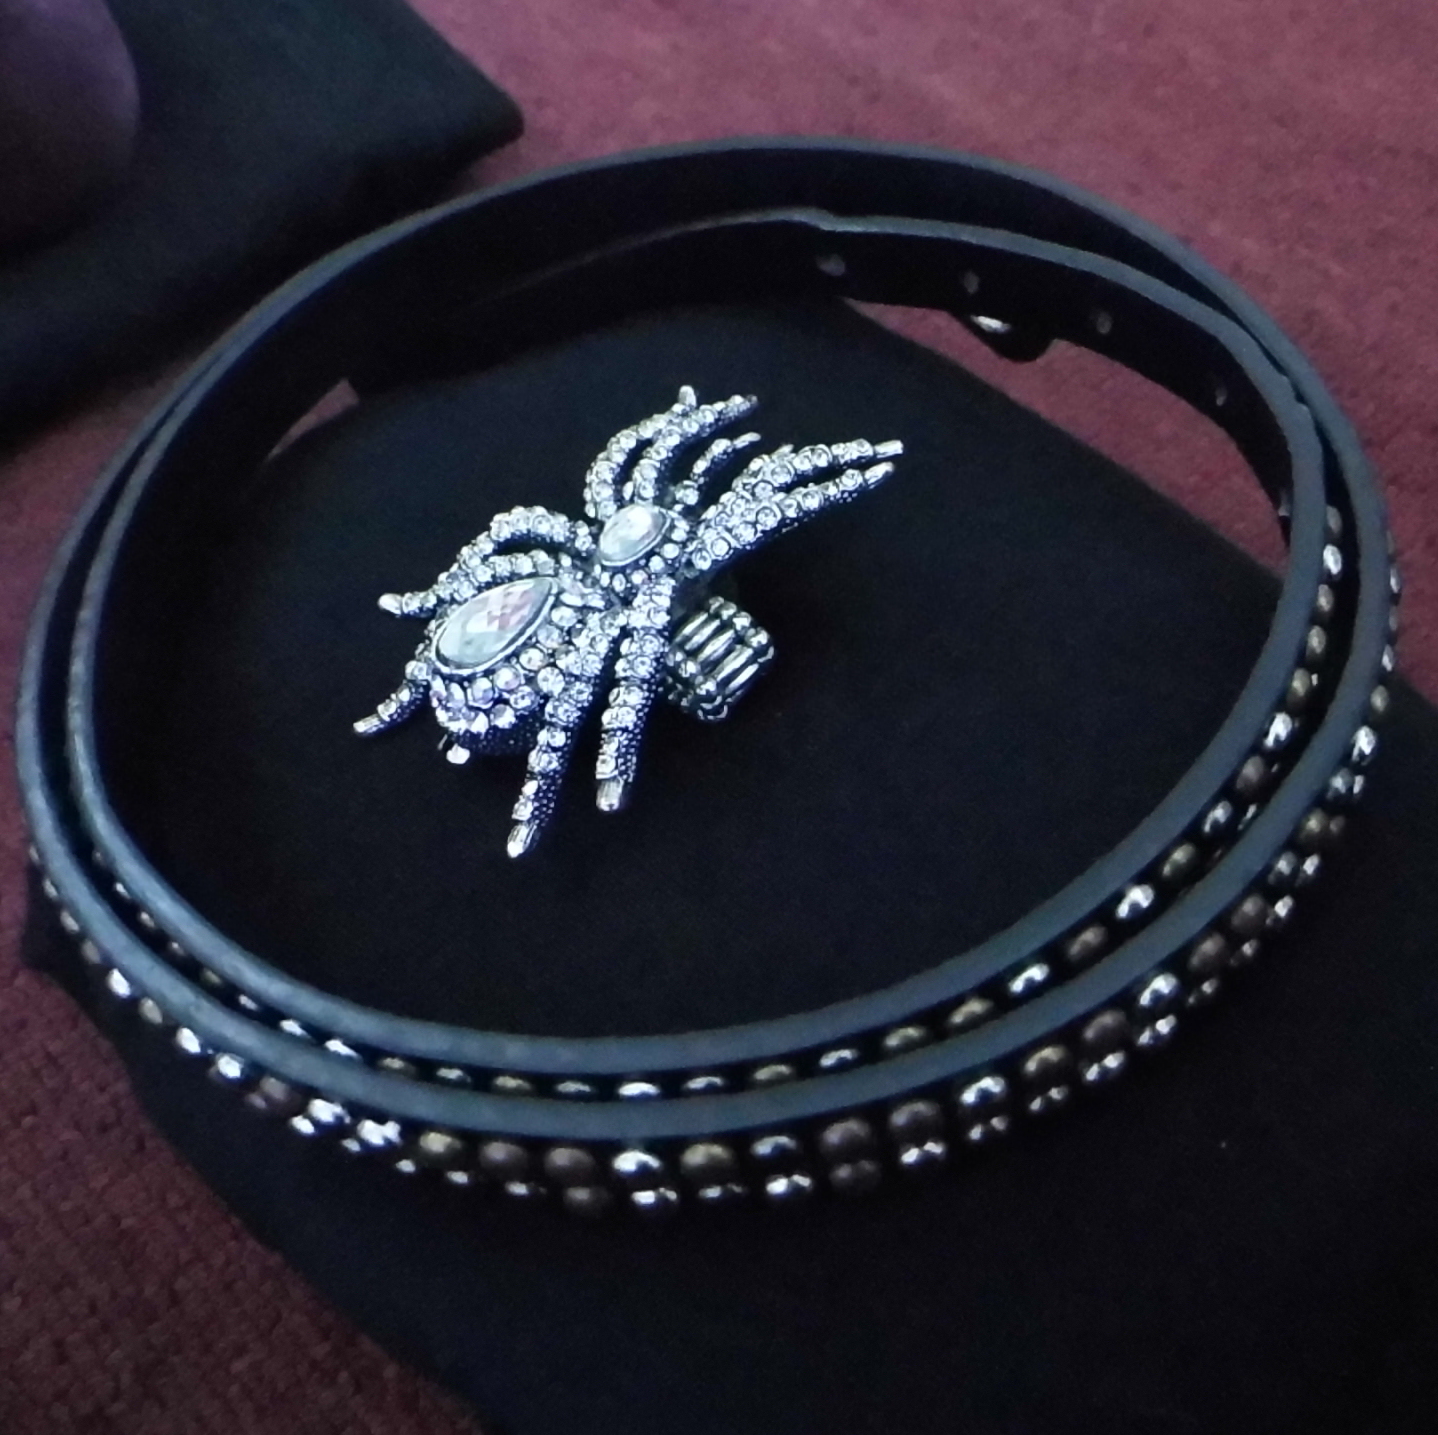 Studded Belt and Spider Ring